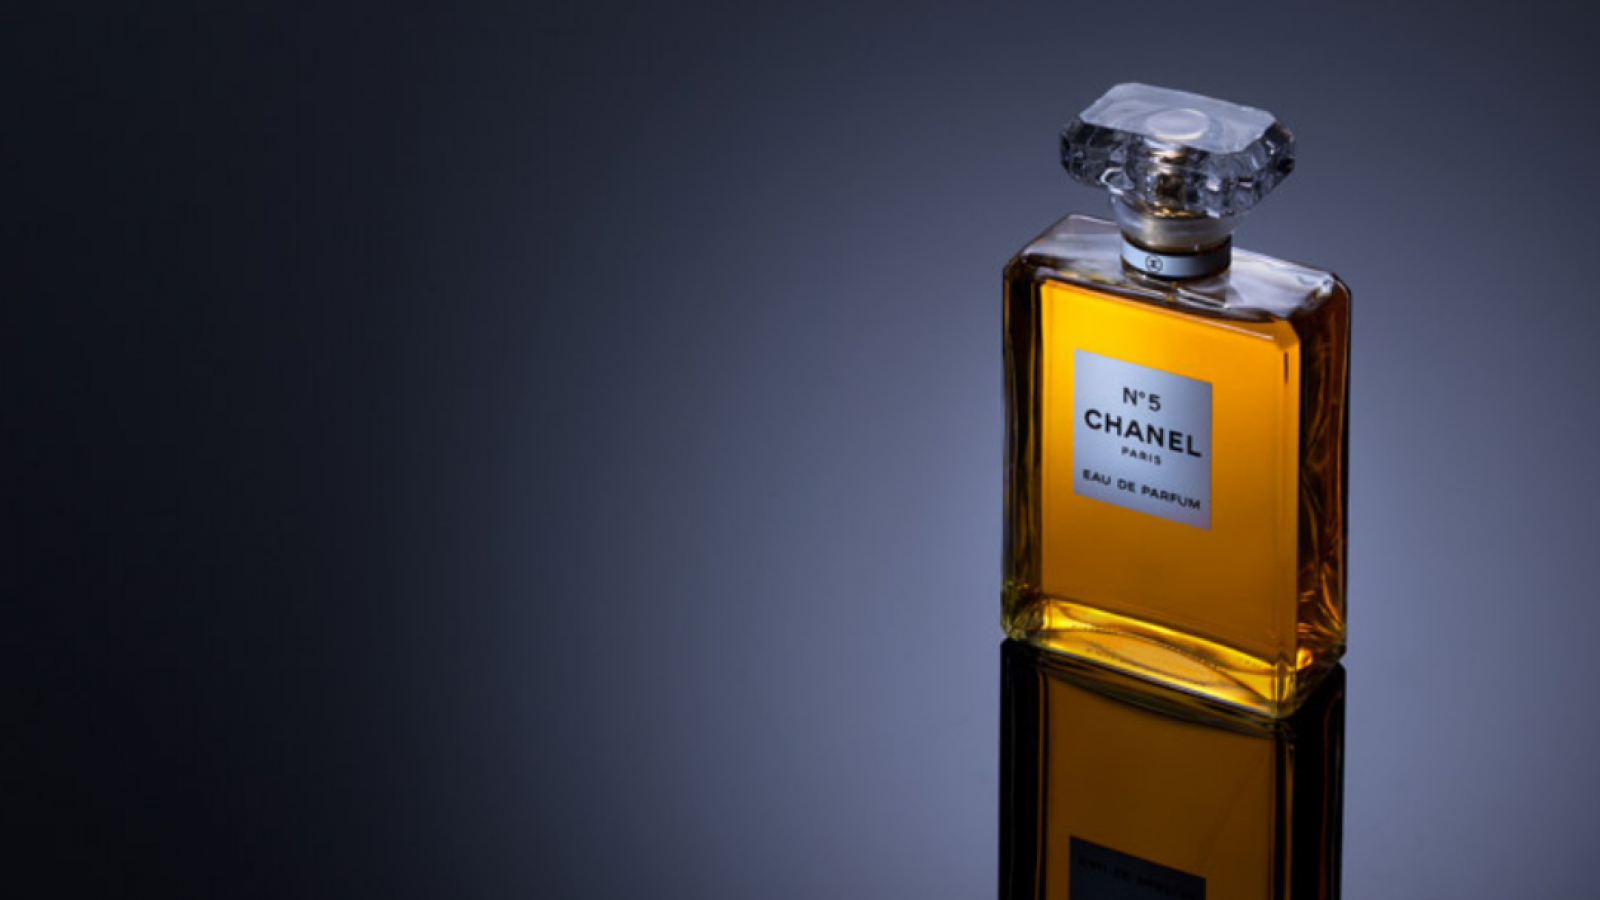 Top 5 Perfumes That Changed The World